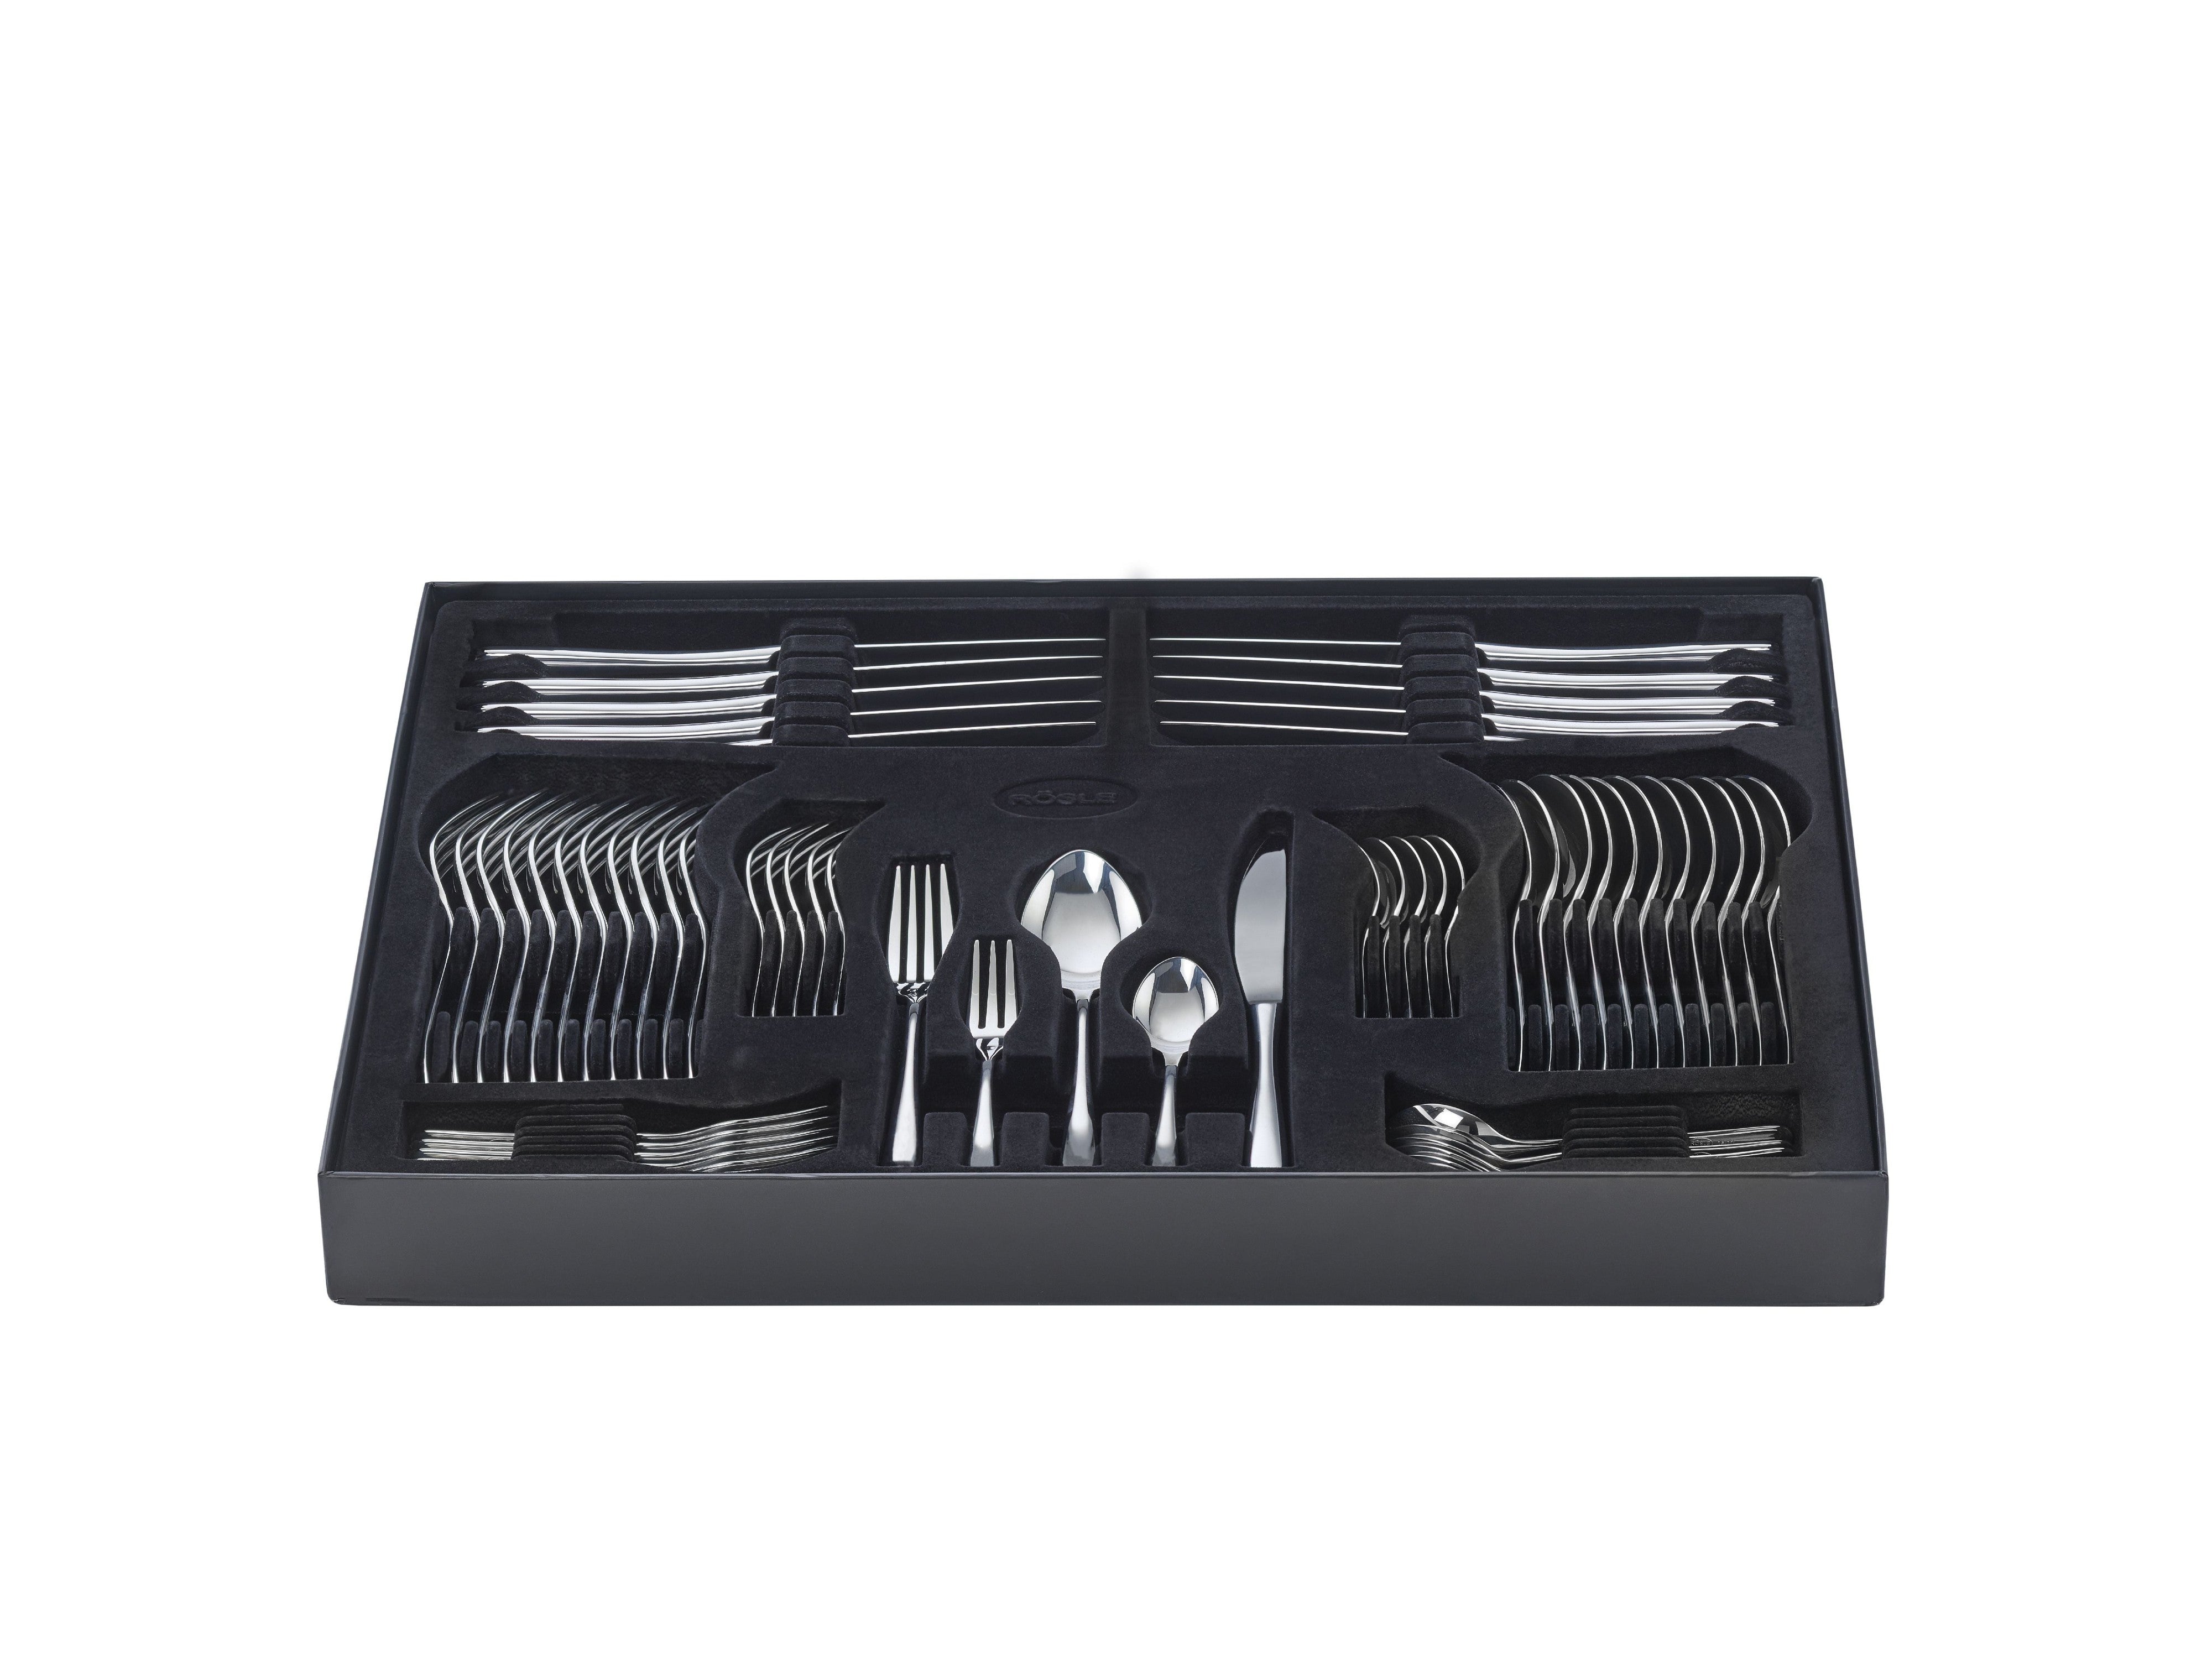 Rösle Passion Cutlery Set With 60 Pieces, Polished